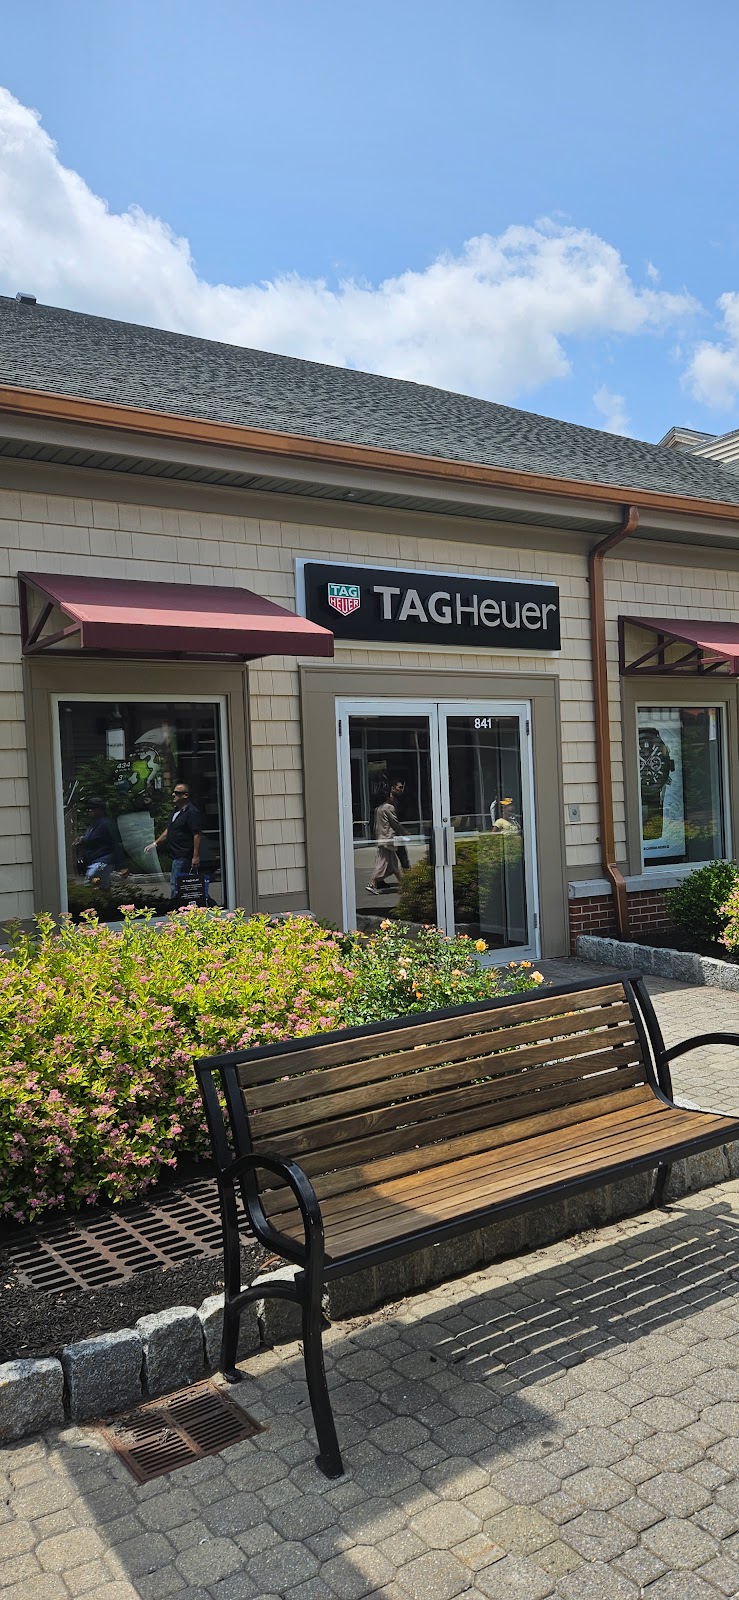 TAG Heuer | WOODBURY COMMONS PREMIUM OUTLETS, 841 Grapevine Ct, Central Valley, NY 10917 | Phone: (845) 928-1018